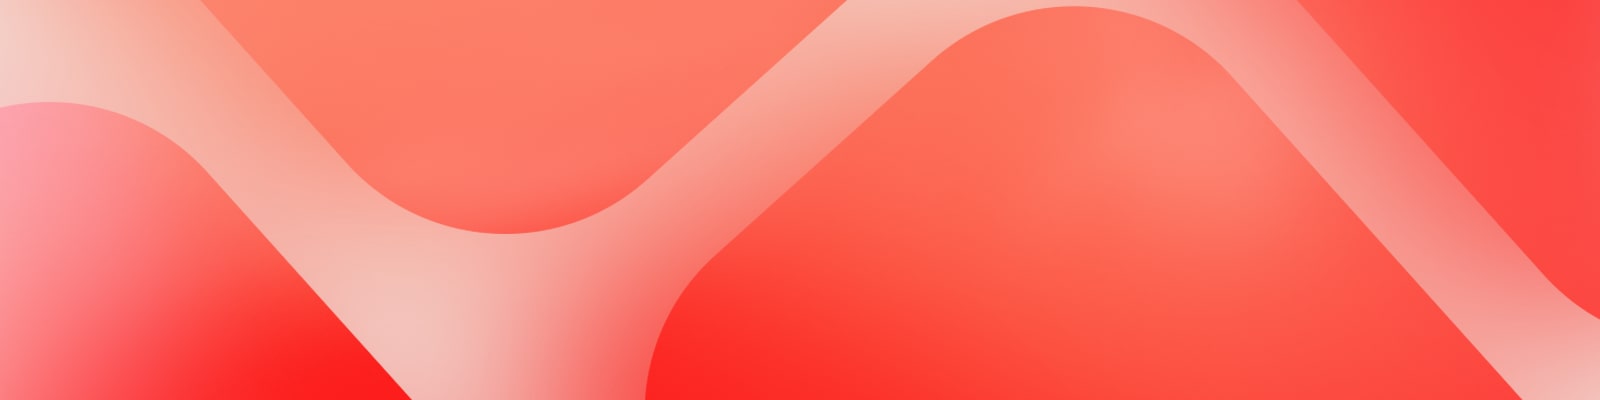 There's a lg logo on the red gradient background